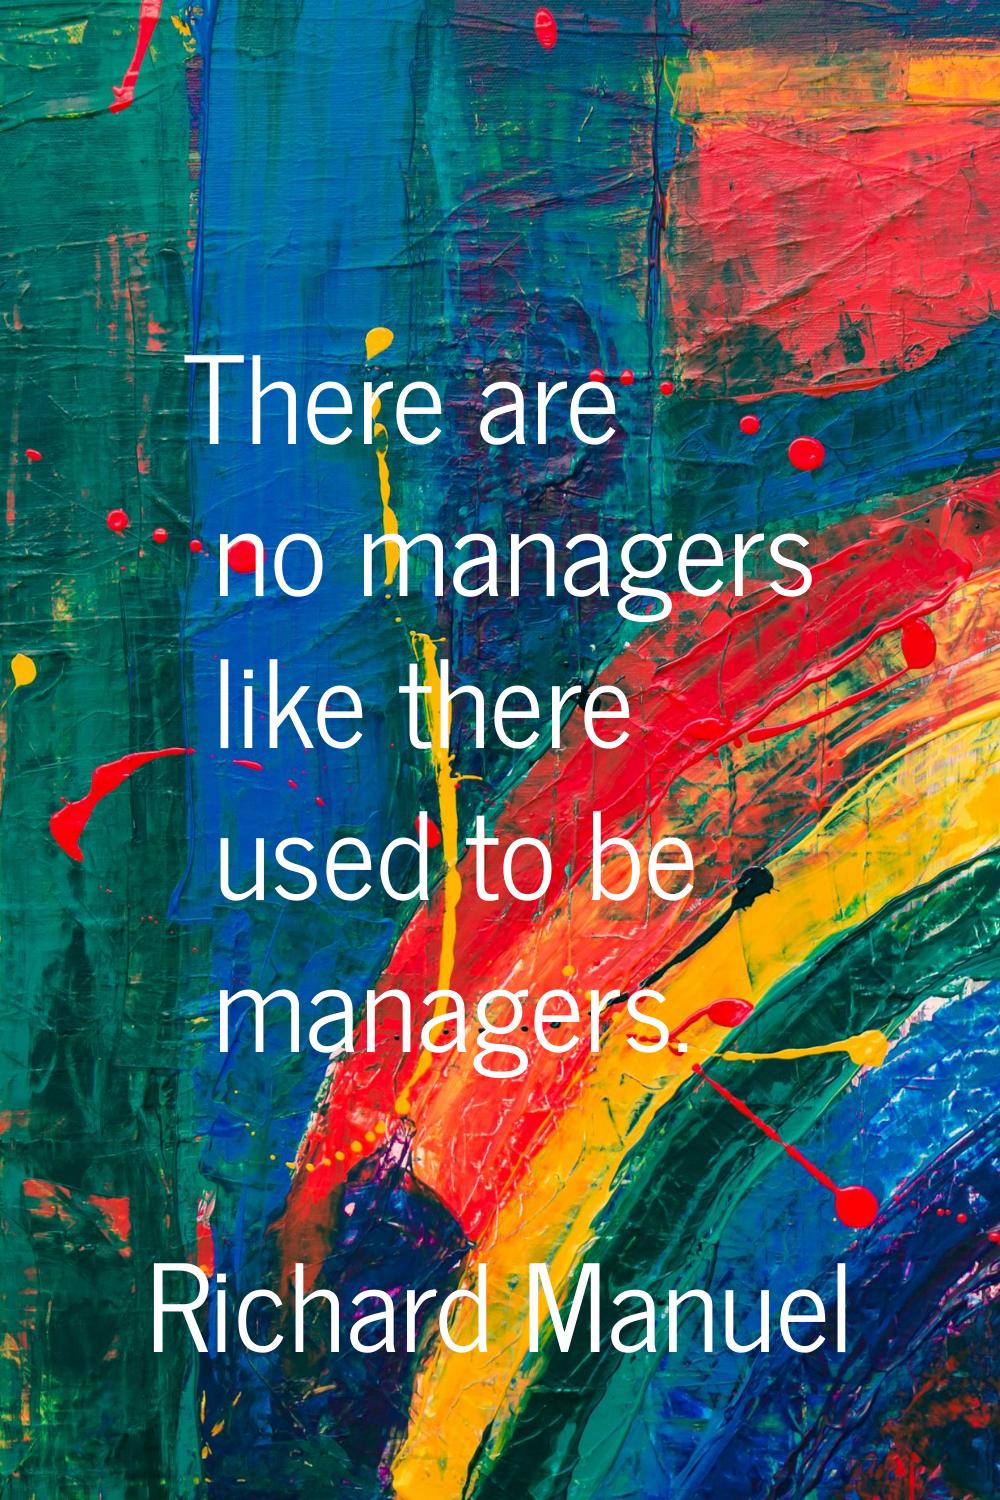 There are no managers like there used to be managers.